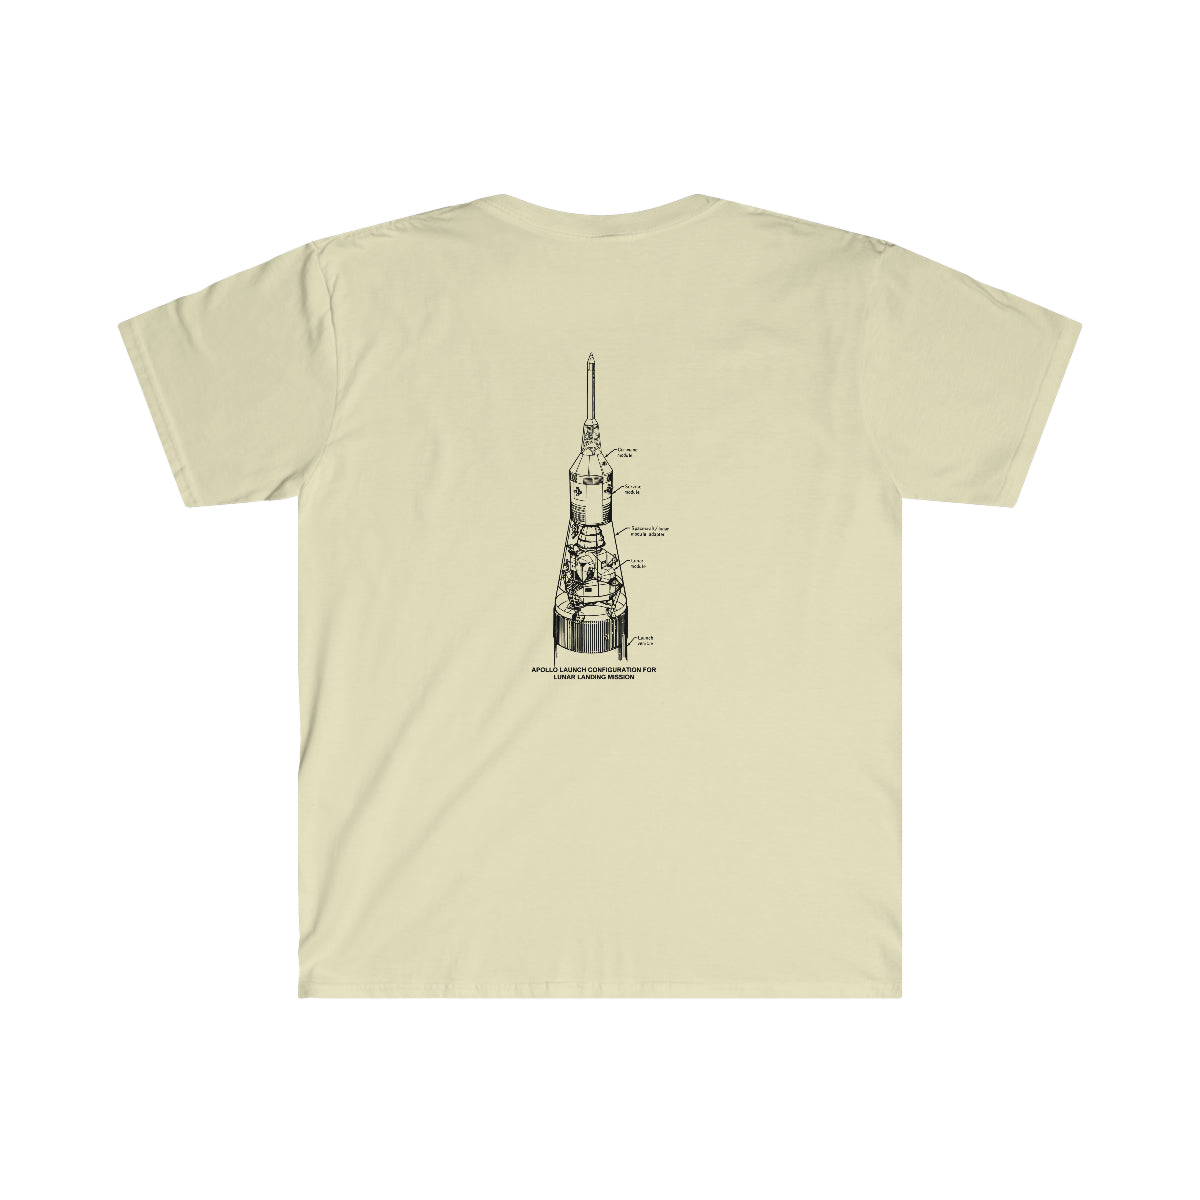 An Apollo Launch Configuration T-shirt with a drawing of a tower, perfect for the launch event.